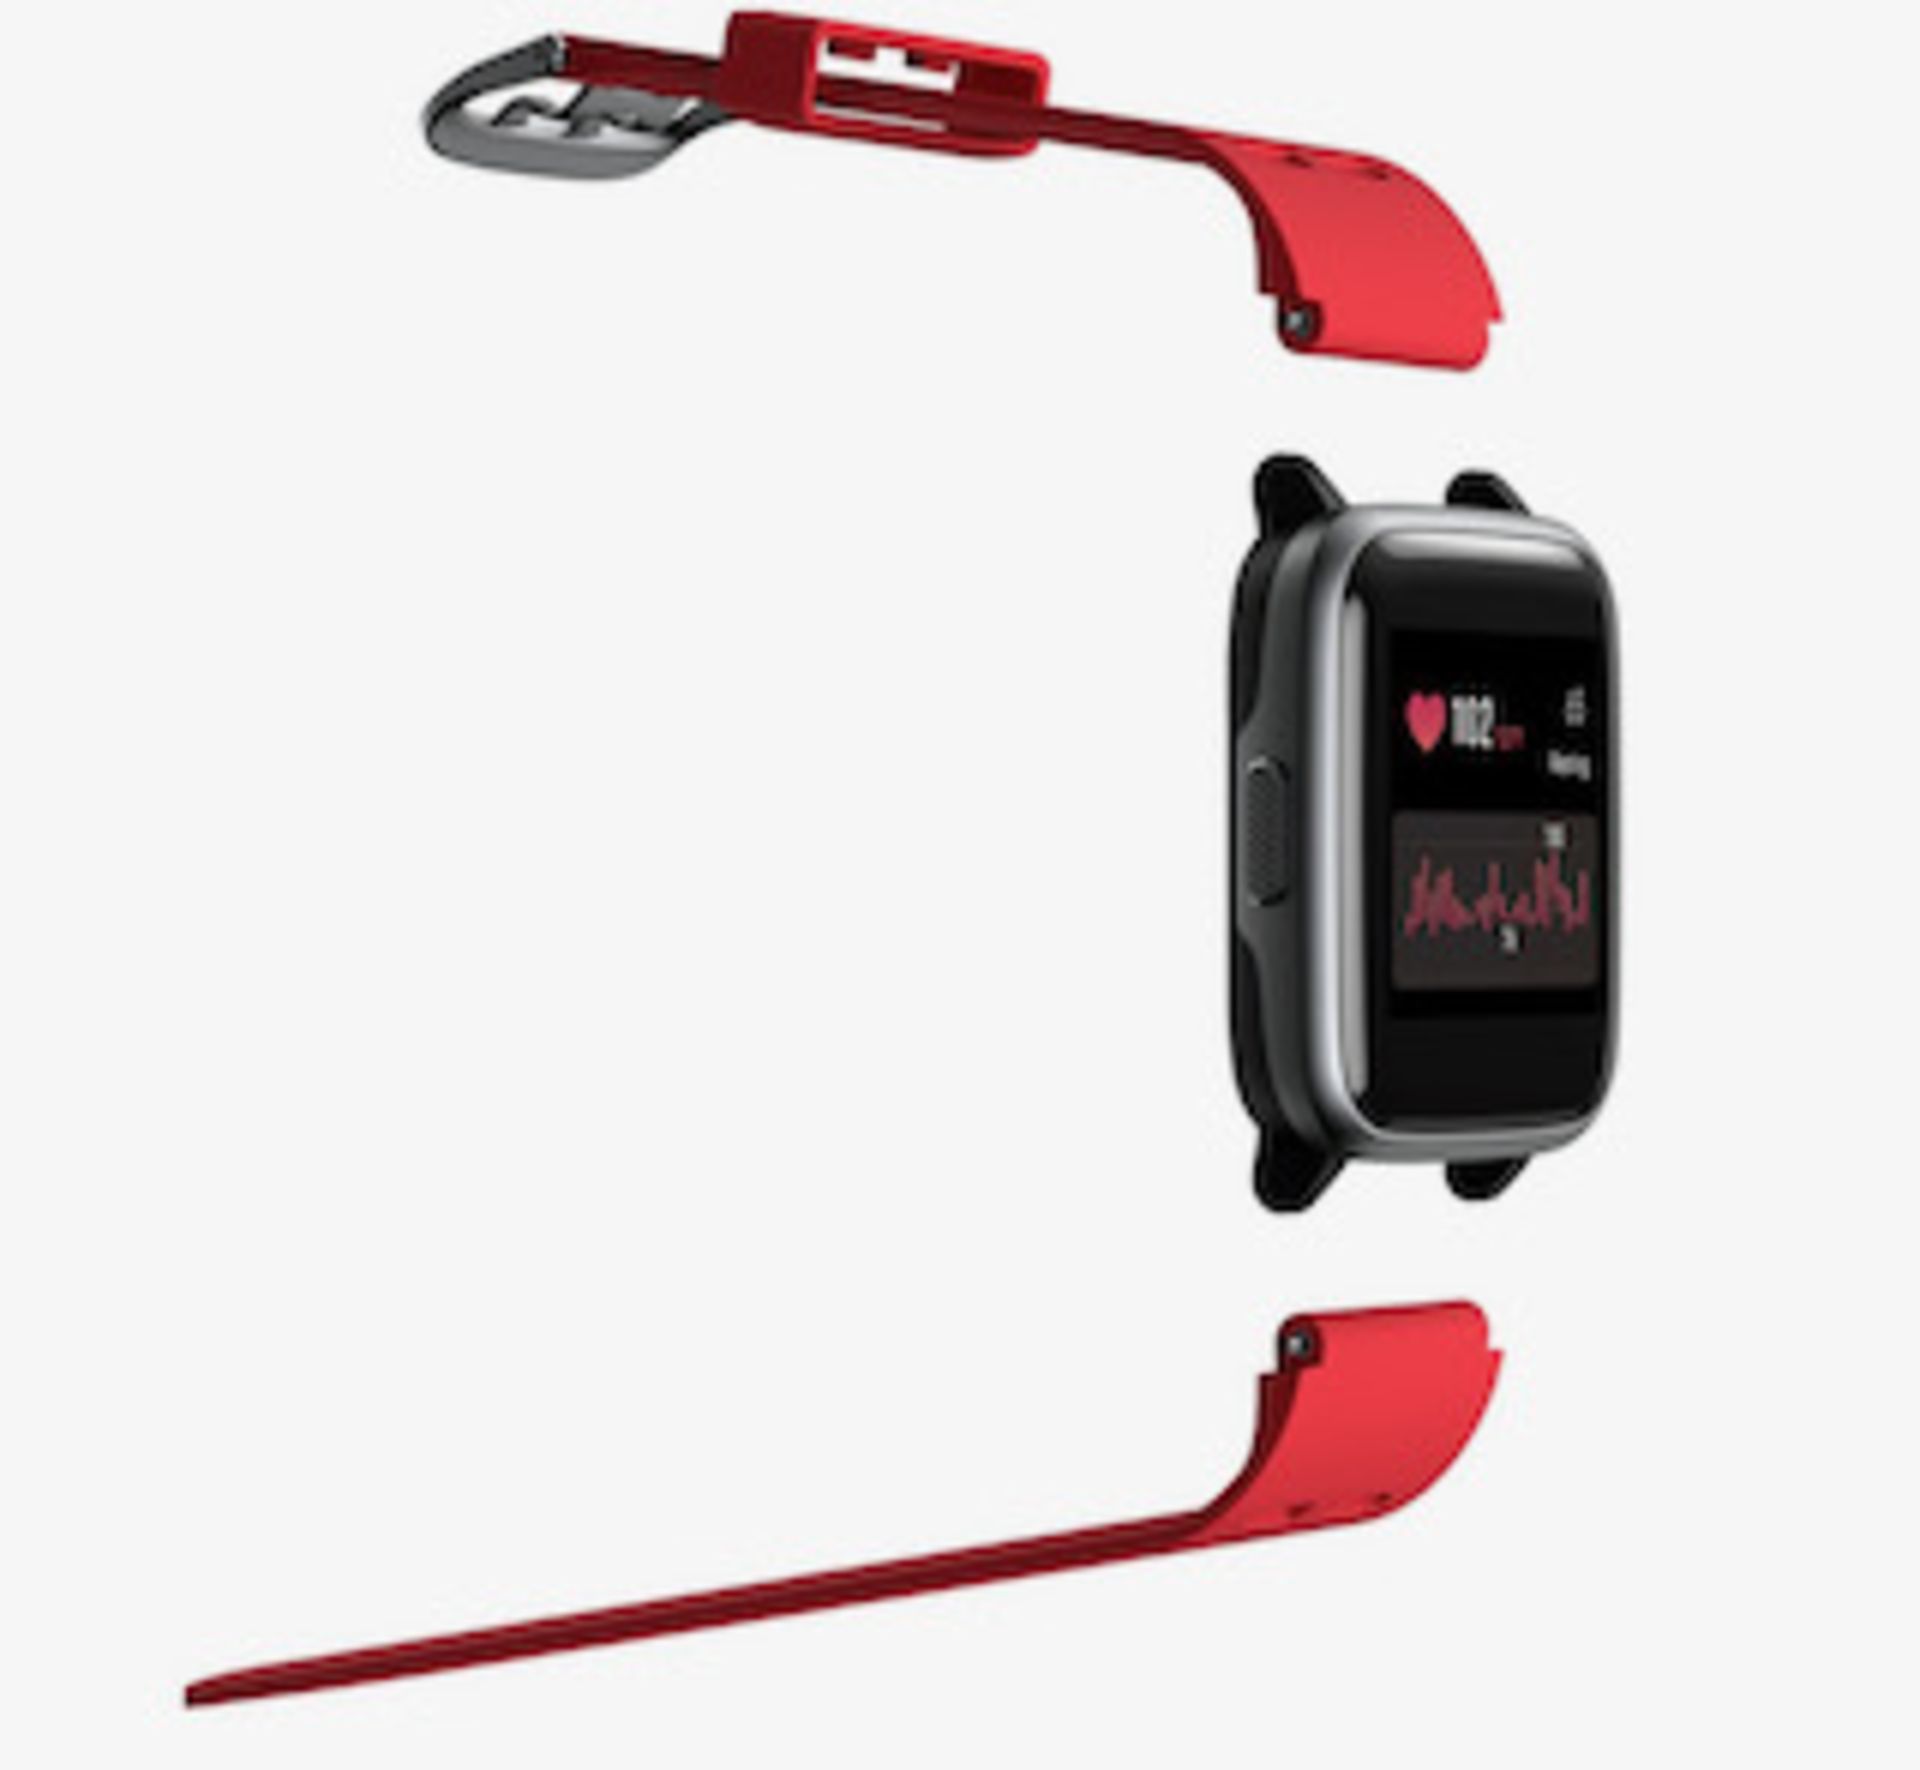 Brand New Unisex Fitness Tracker Watch Id205 Red Strap About This Item 1.3-Inch LCD Colour - Image 14 of 34